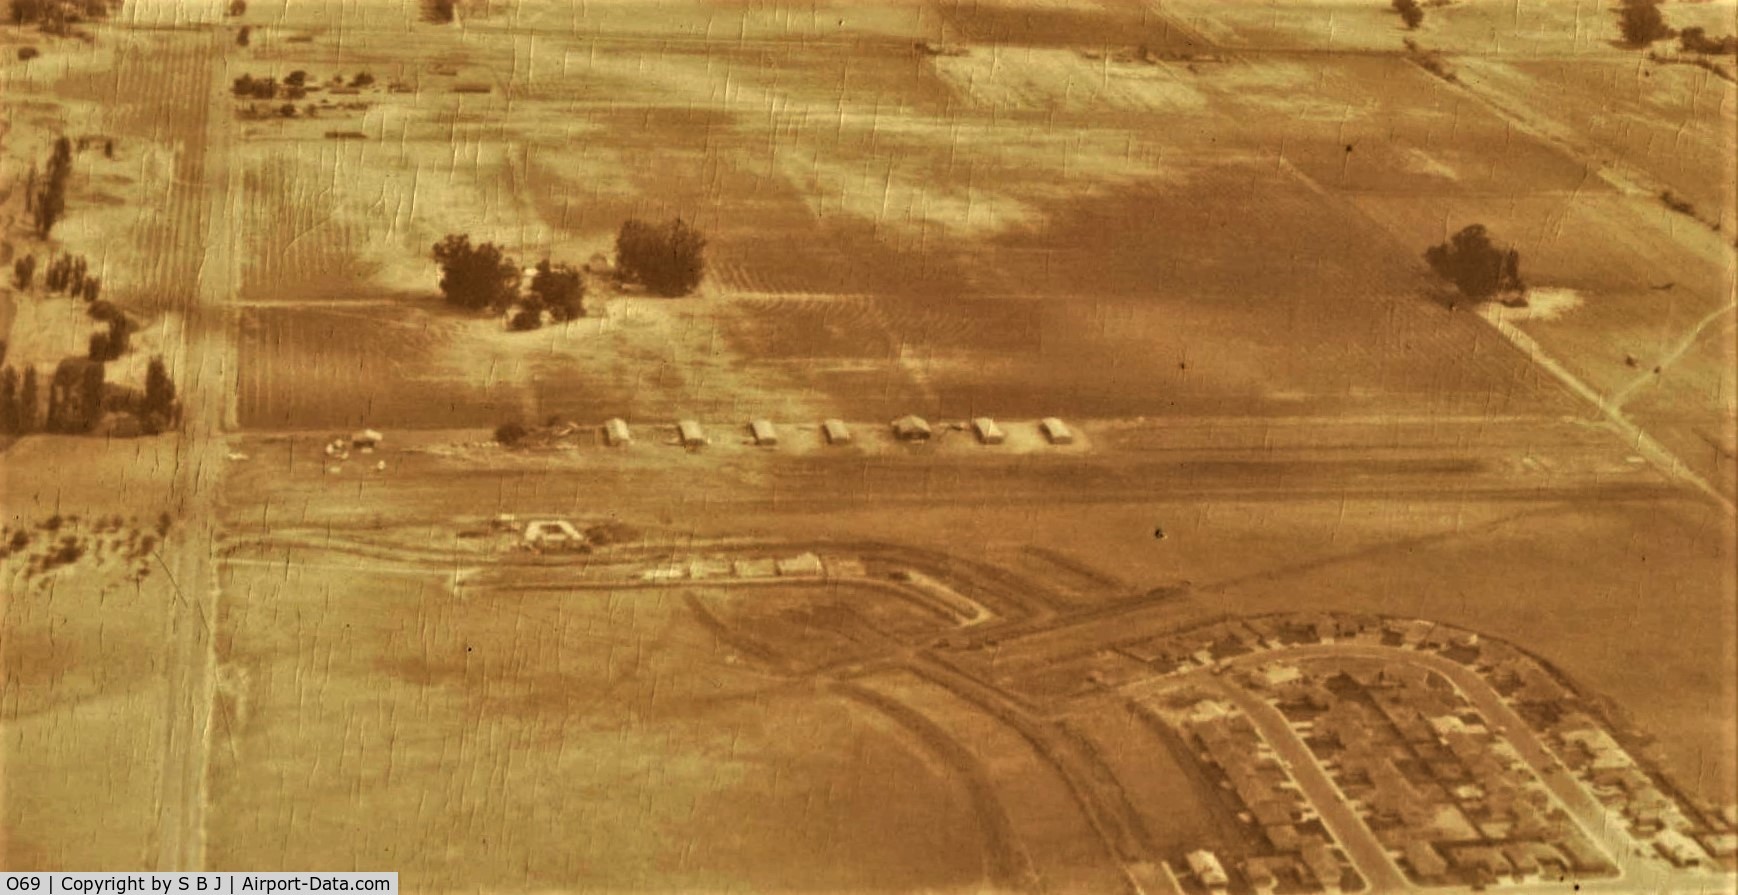 Petaluma Municipal Airport (O69) - Petaluma around 1965. Notice runway right up to road which could cause some excitement when landing to the south. I only landed that way once in my 15 or so visits. Was a busy but friendly airport back then (70s & 80s) with planes parked everywhere. 